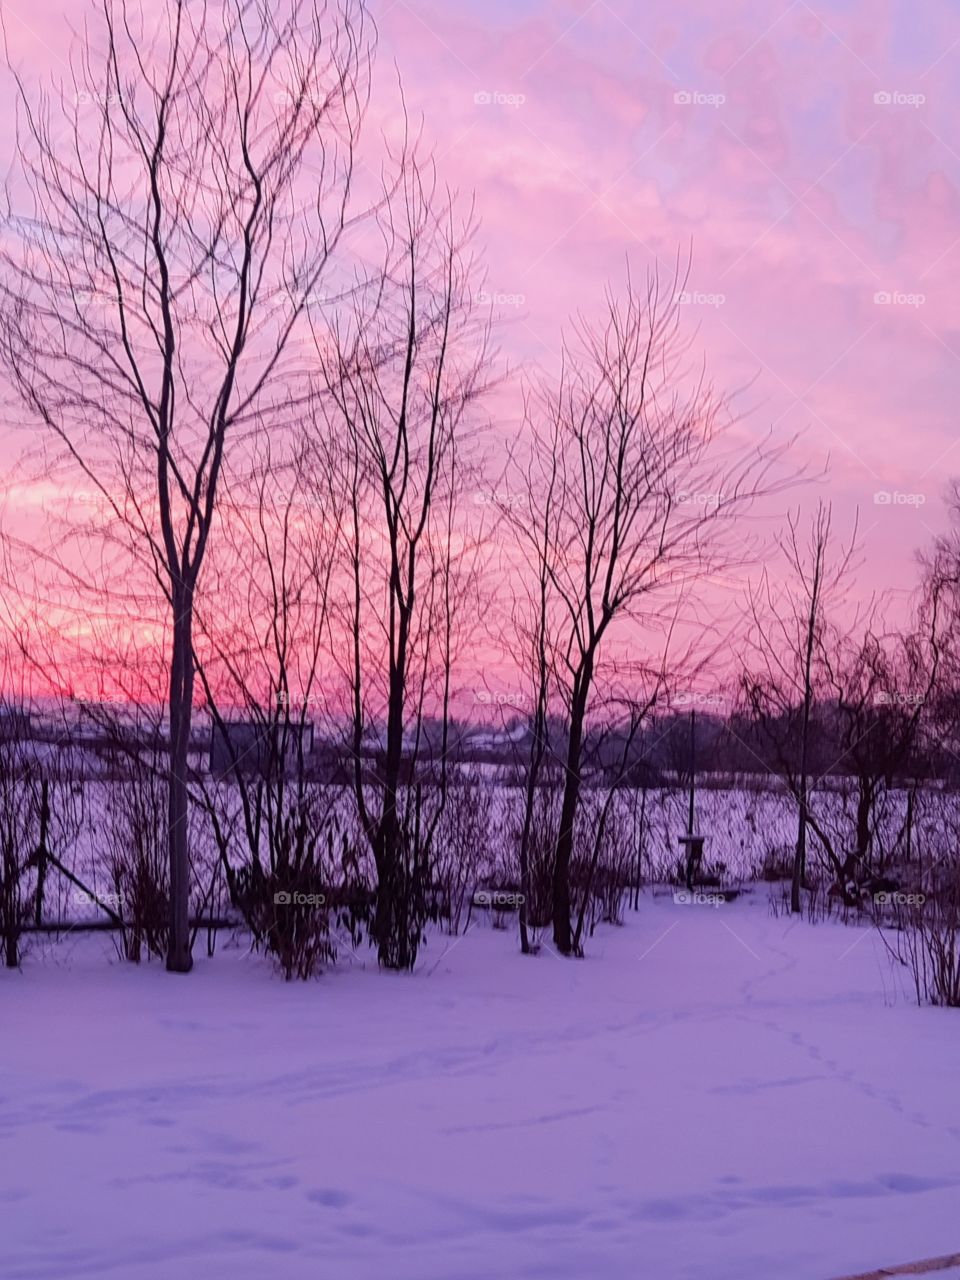 winter dawn in pink-purle shades just before sunrise